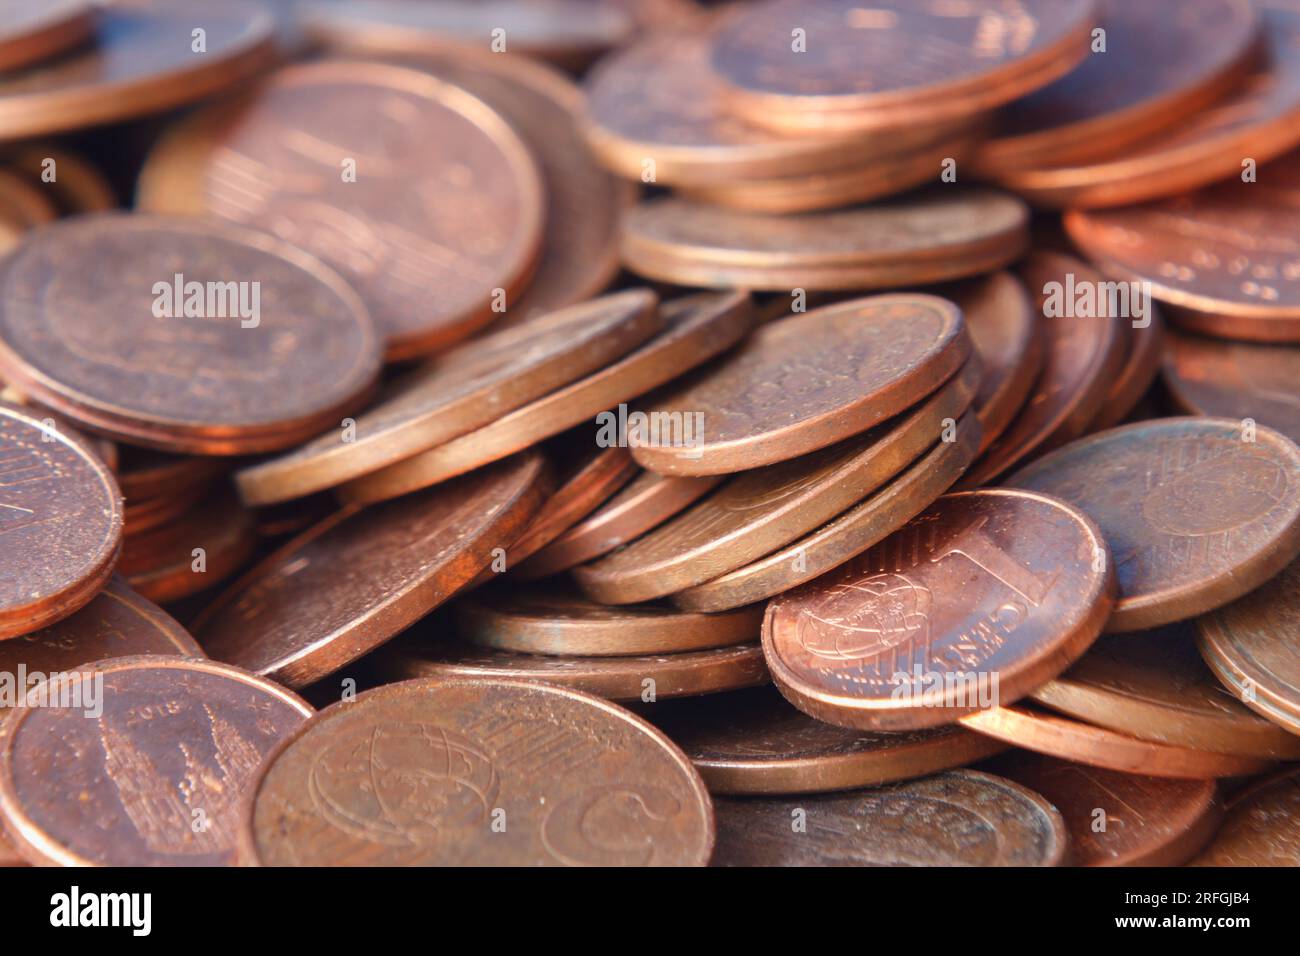 Group of euro cent coins piled up, Spain Stock Photo